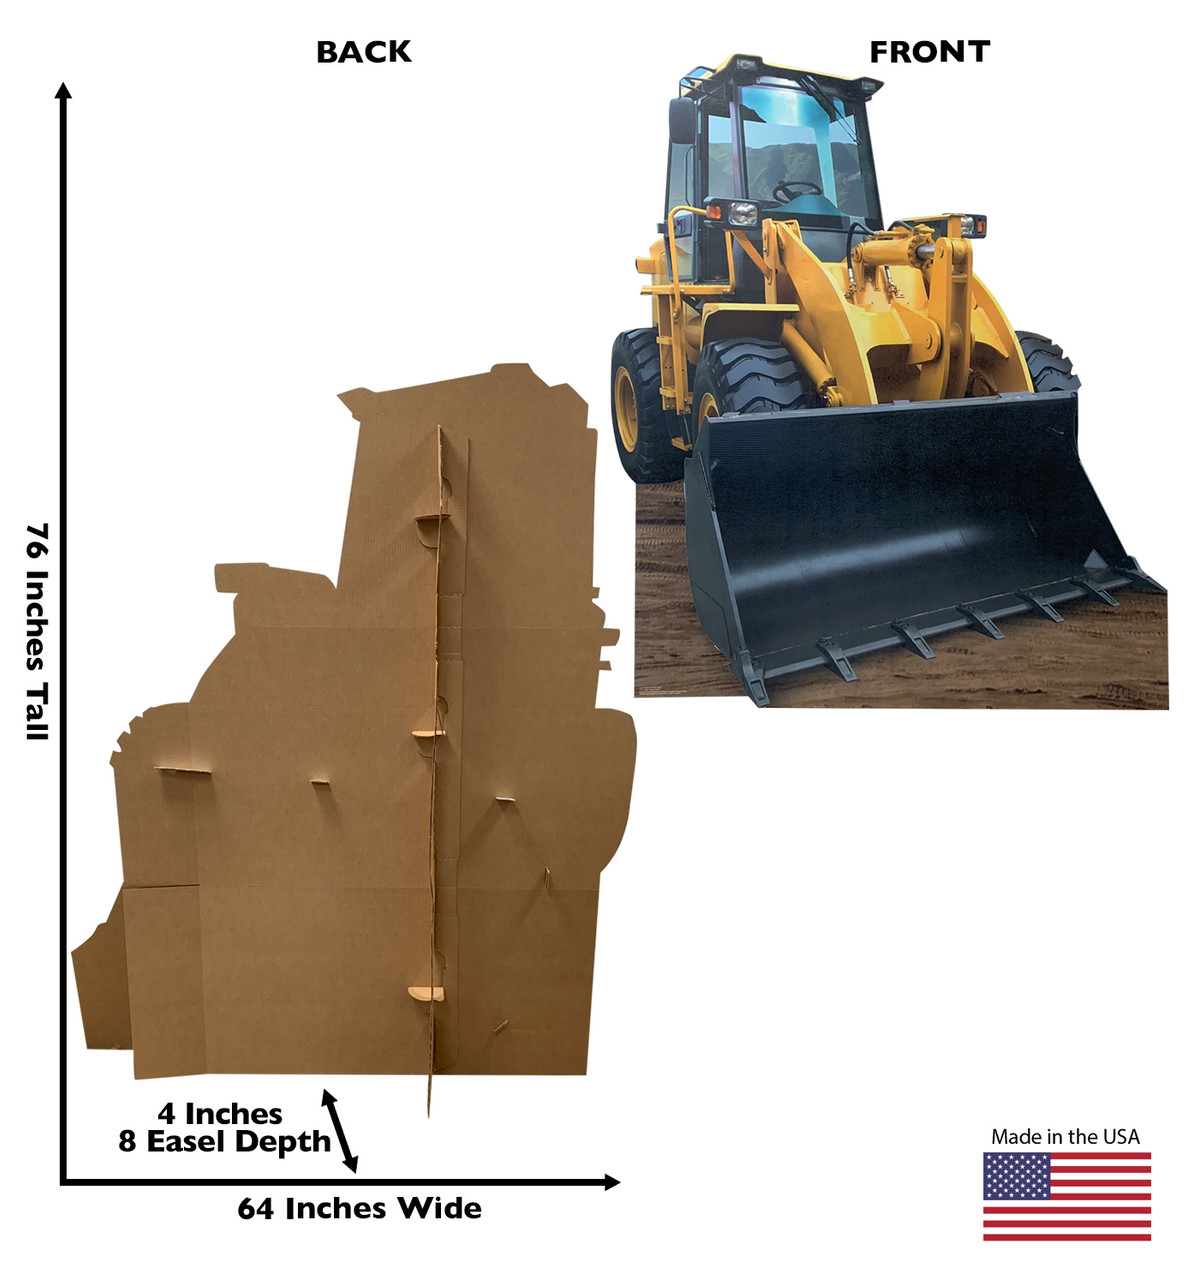 Life-size cardboard standee of construction front loader with back and front dimensions.